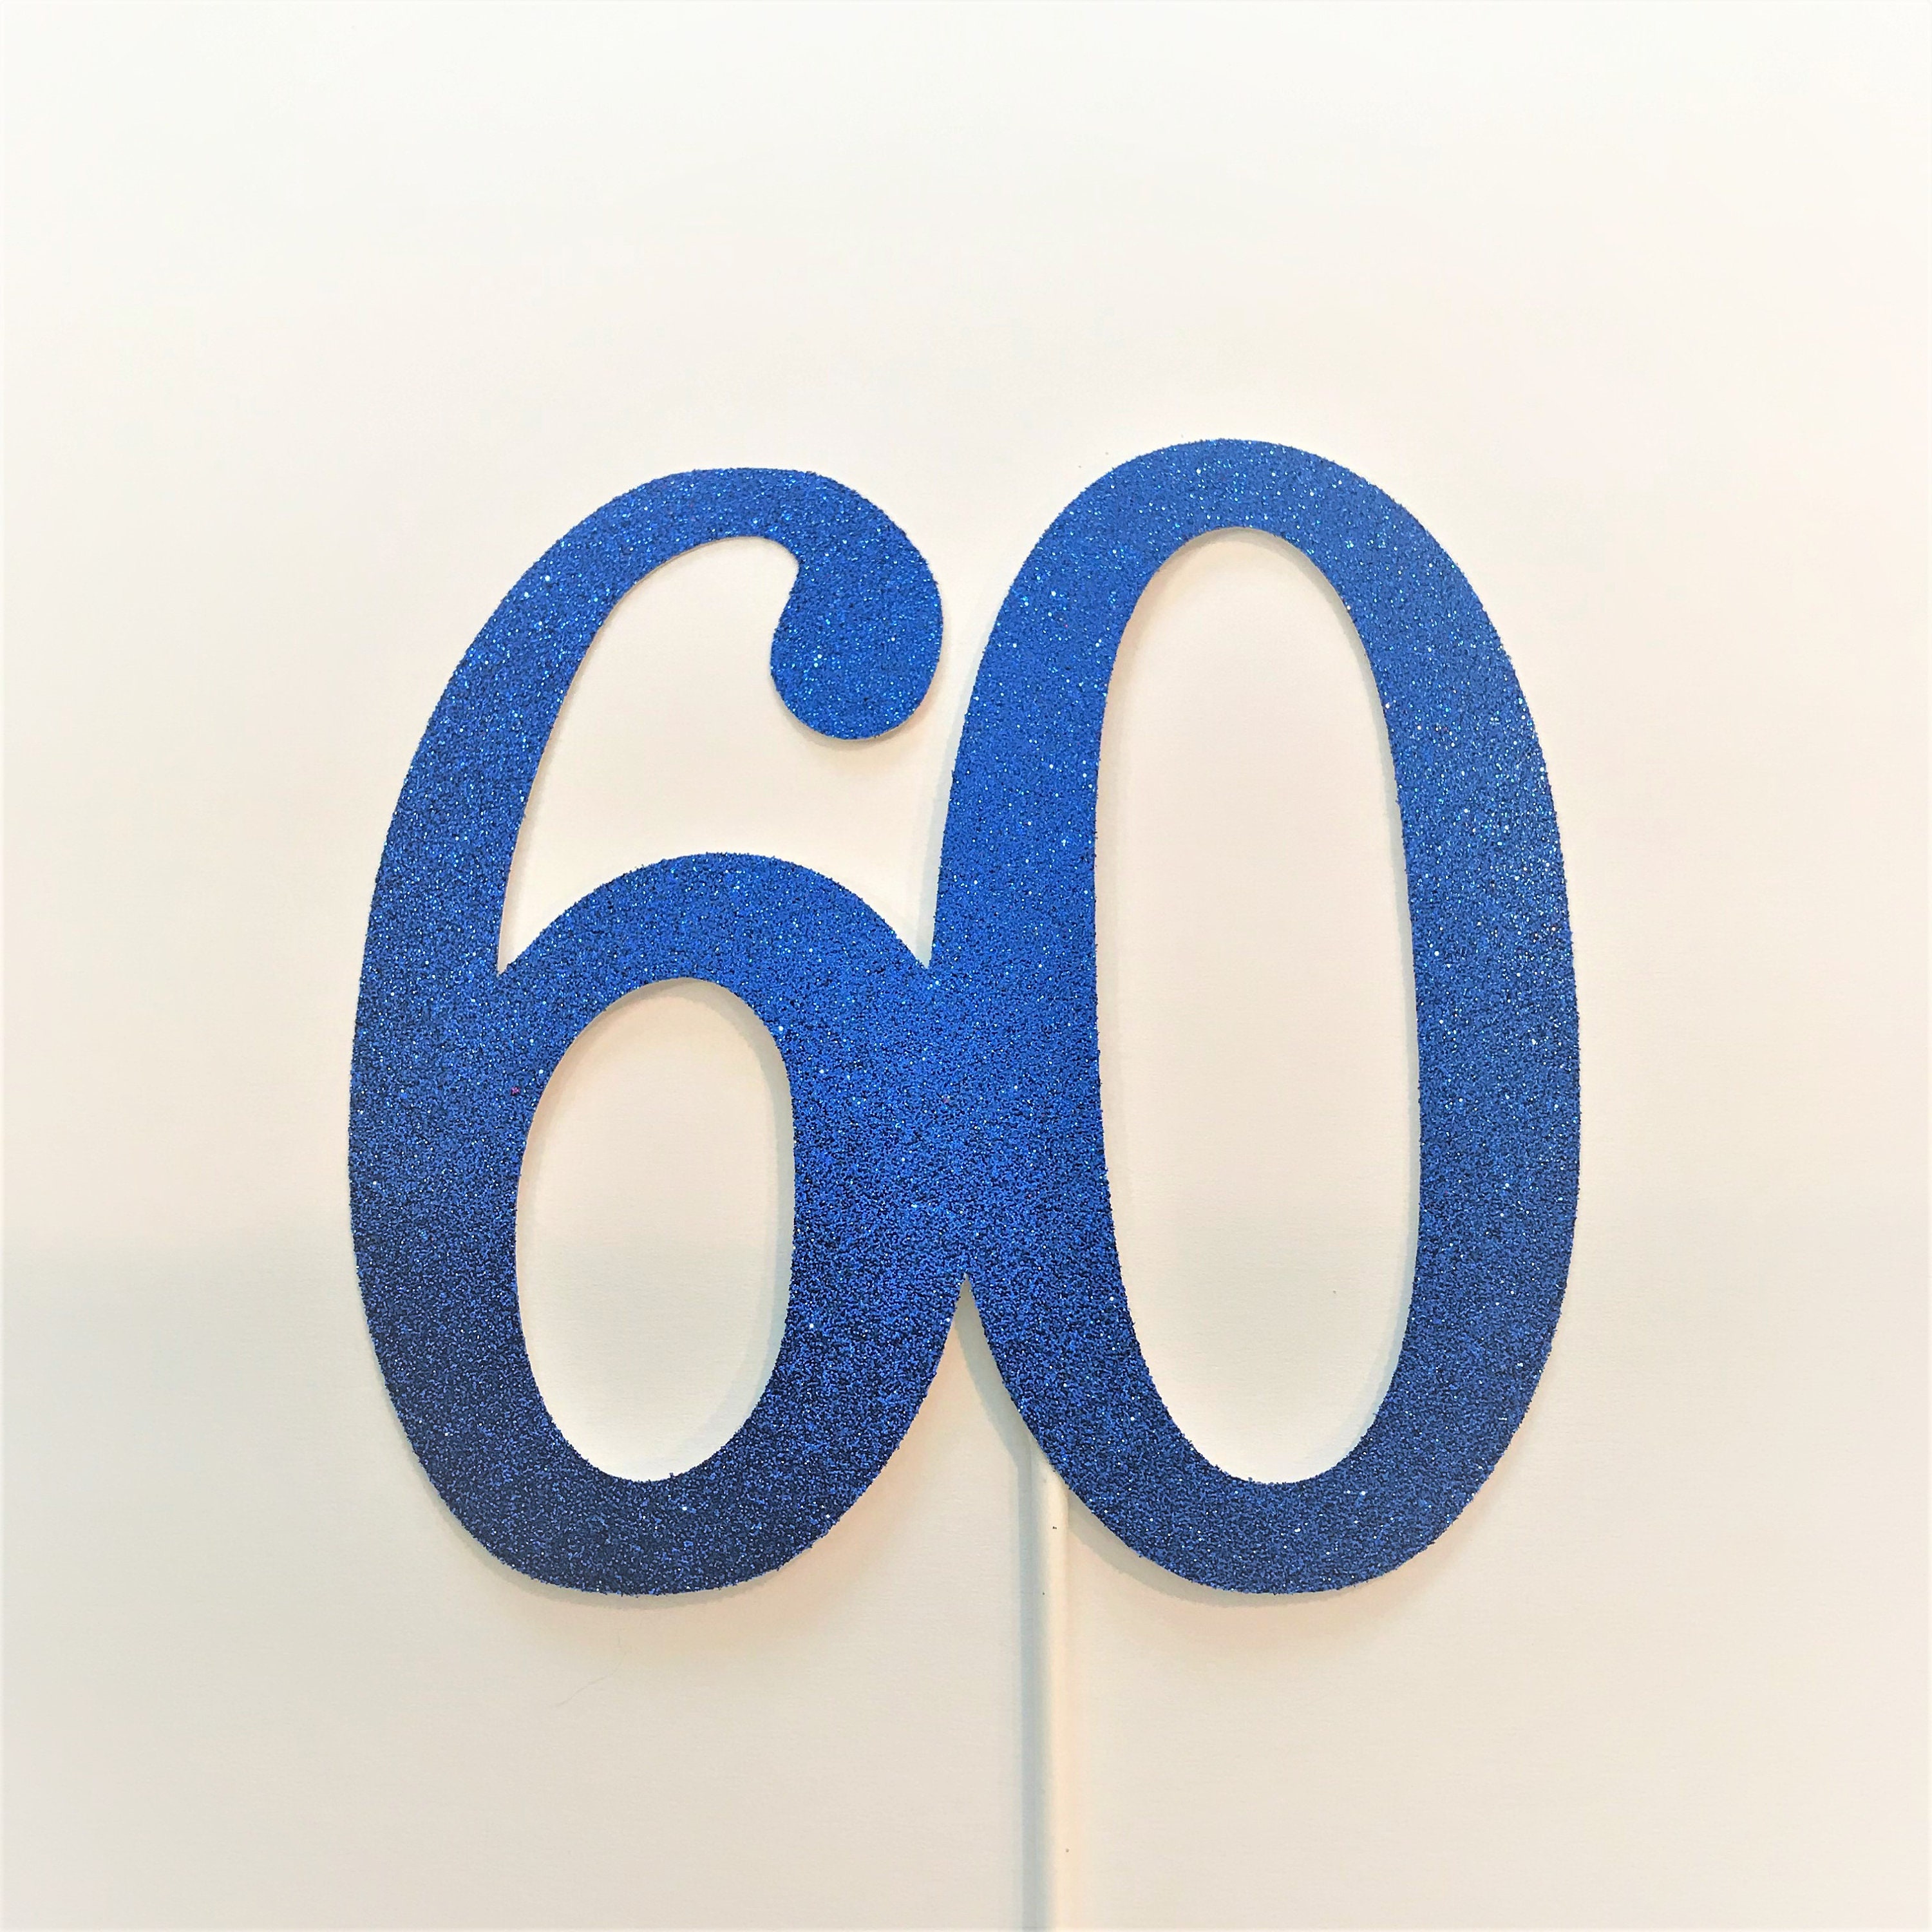 60 And Fabulous Birthday Party Cake Topper By The Gifting Knot |  notonthehighstreet.com